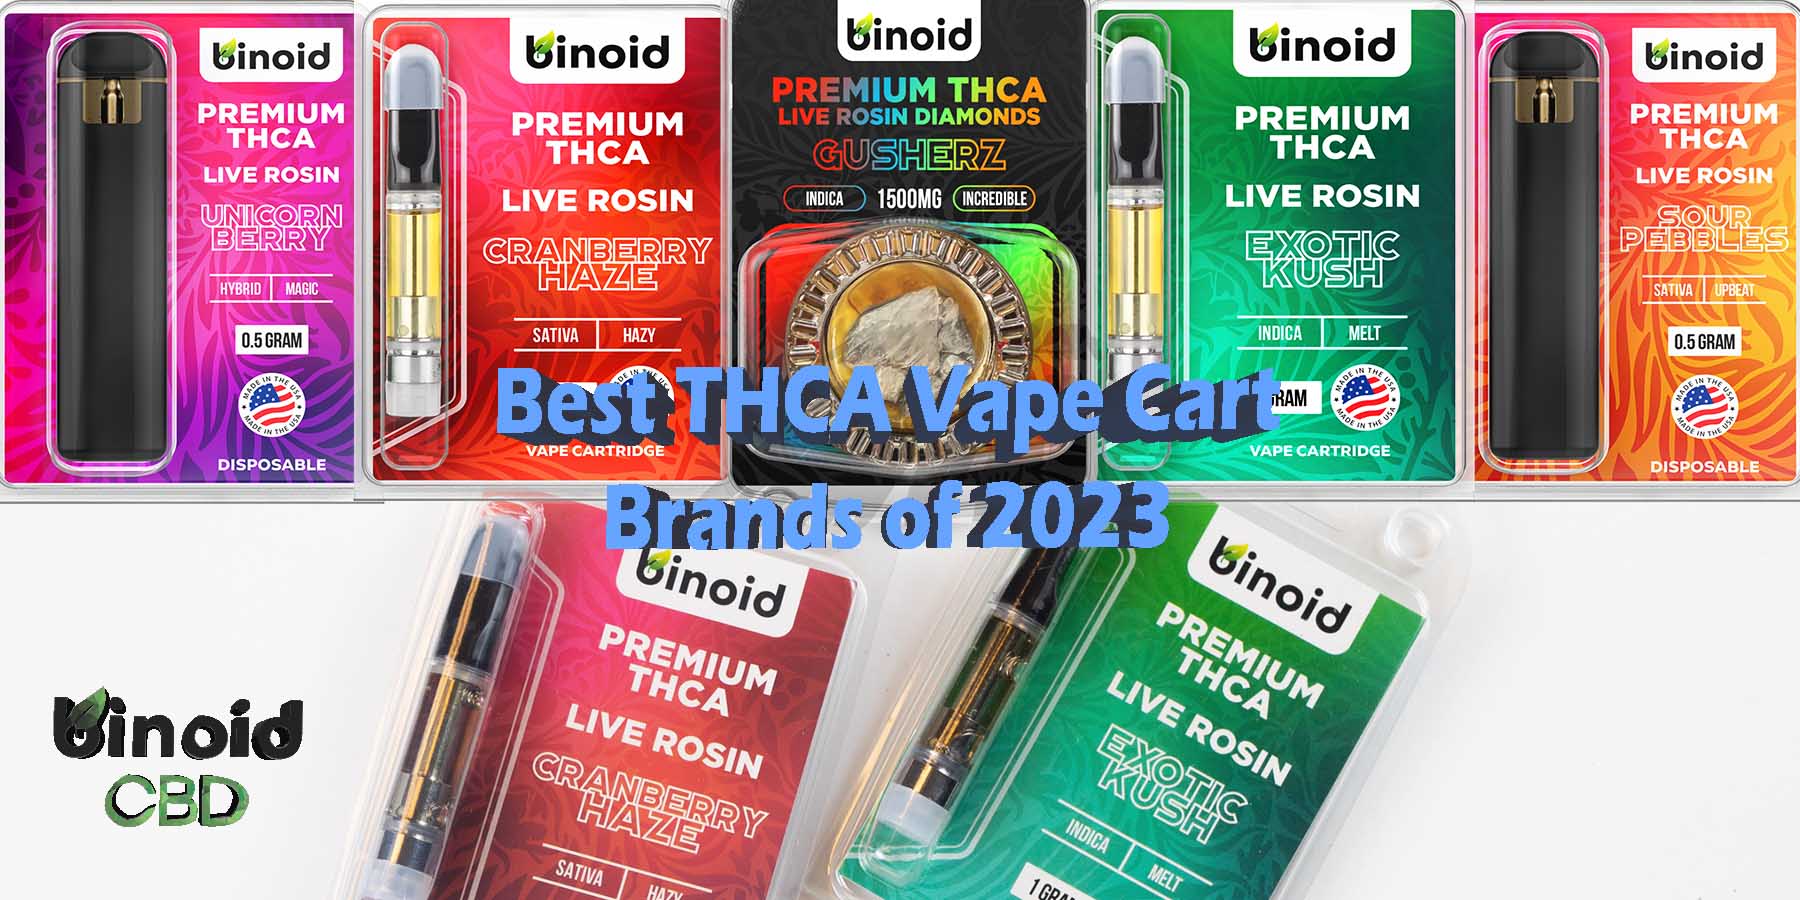 Best THCA Vape Cart Brands Of 2023 Review Take Work Online Best Brand Price Get Near Me Lowest Coupon Discount Store Shop Vapes Carts Online Binoid psd jpg Aug